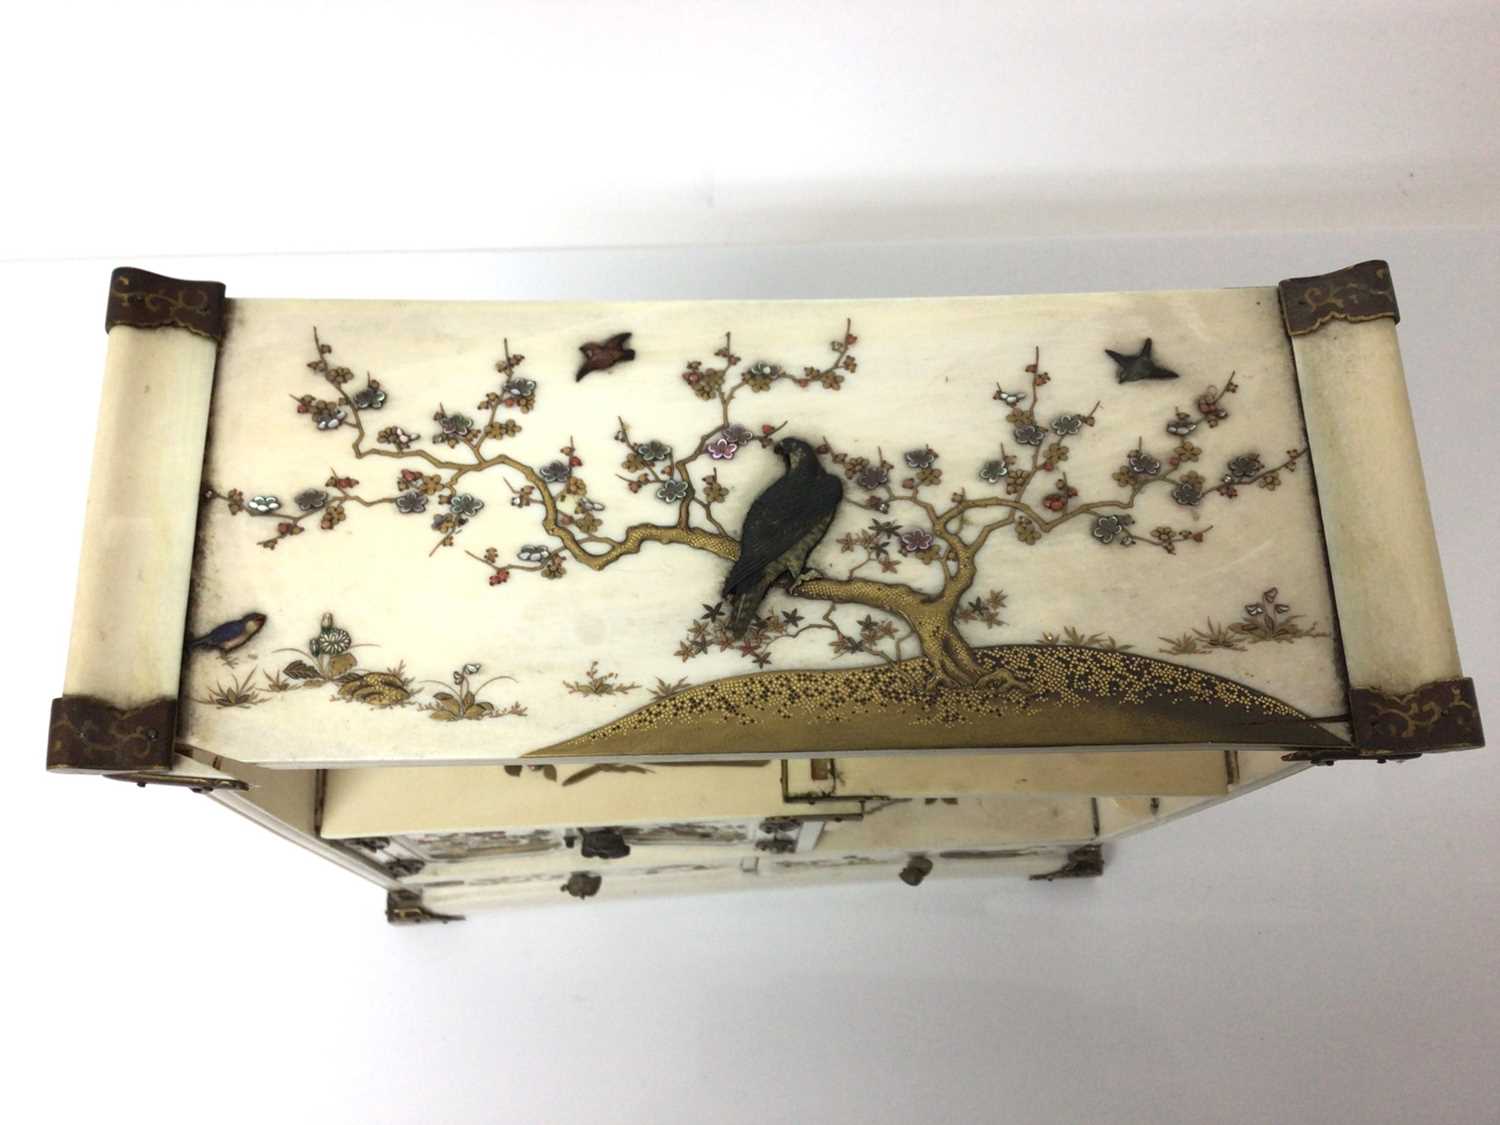 19th century Japanese ivory shibayama cabinet, finely decorated with birds and flowers, 20cm high (s - Image 6 of 10